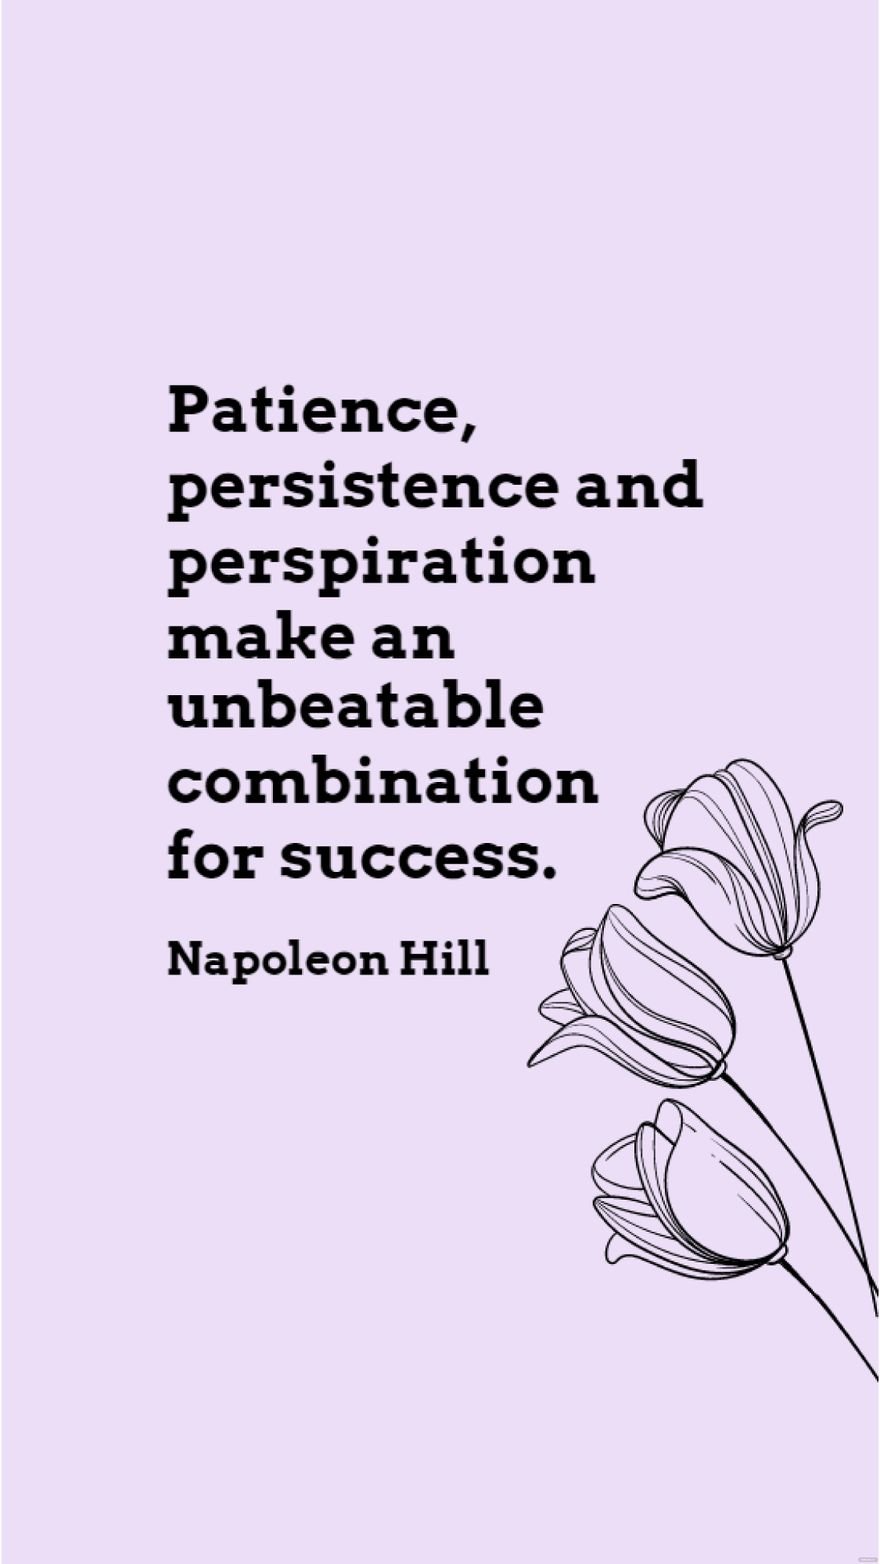 Napoleon Hill - Patience, persistence and perspiration make an unbeatable combination for success. in JPG